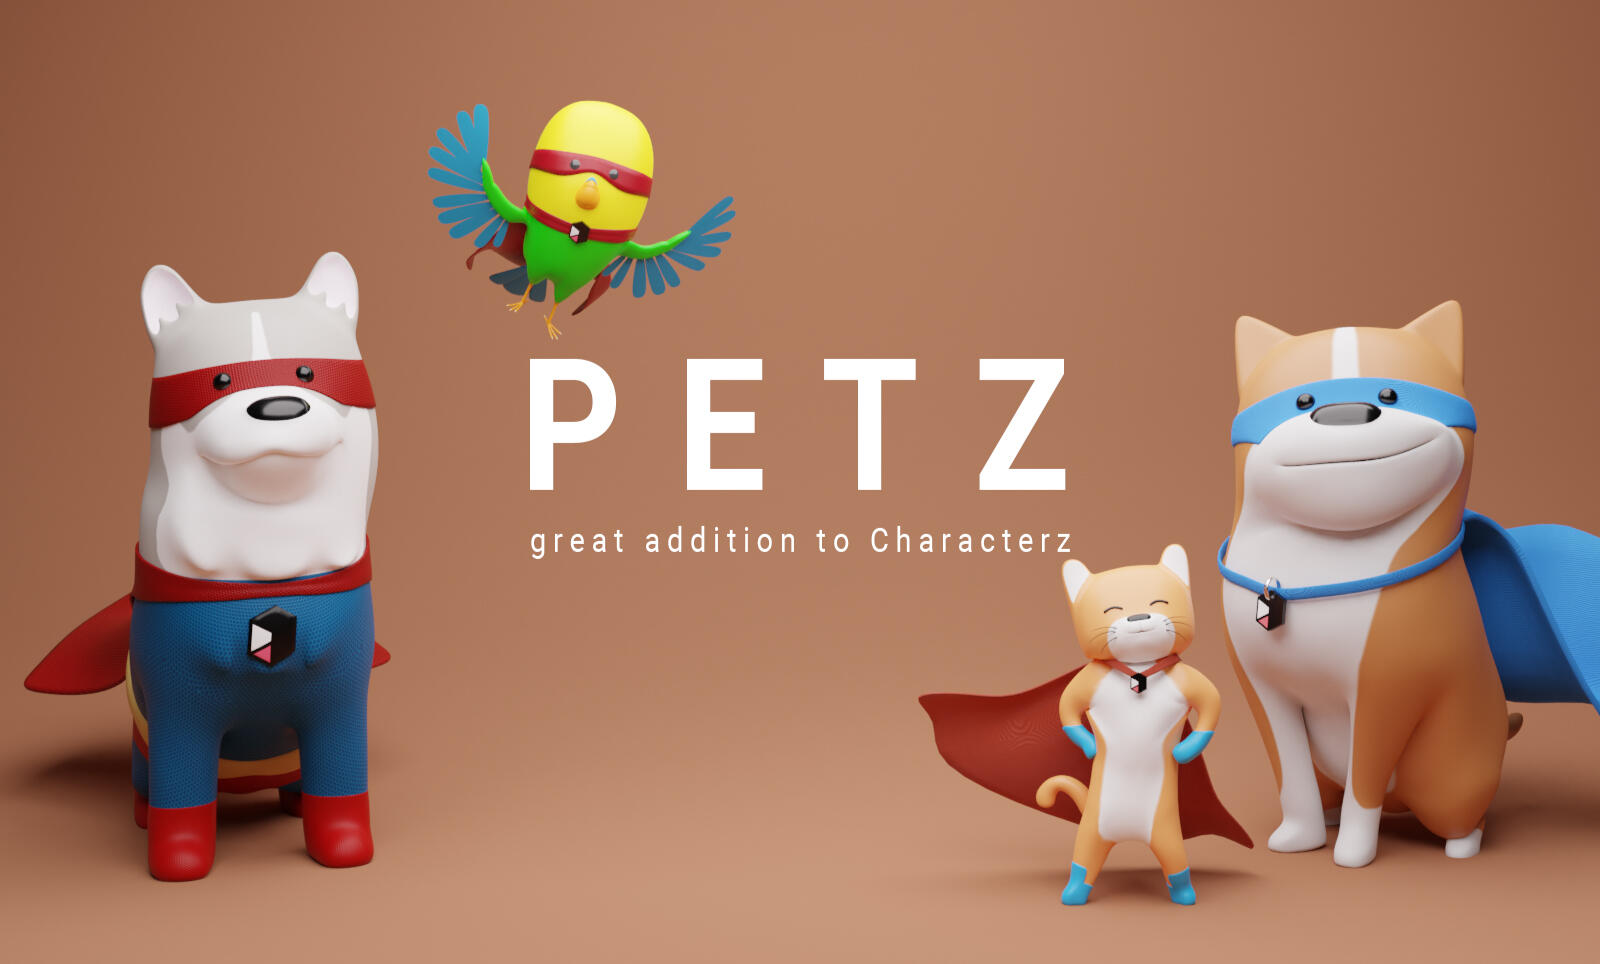 3D Pets (animals) - 3D dog and 3D cat as an cute addition to characterz library